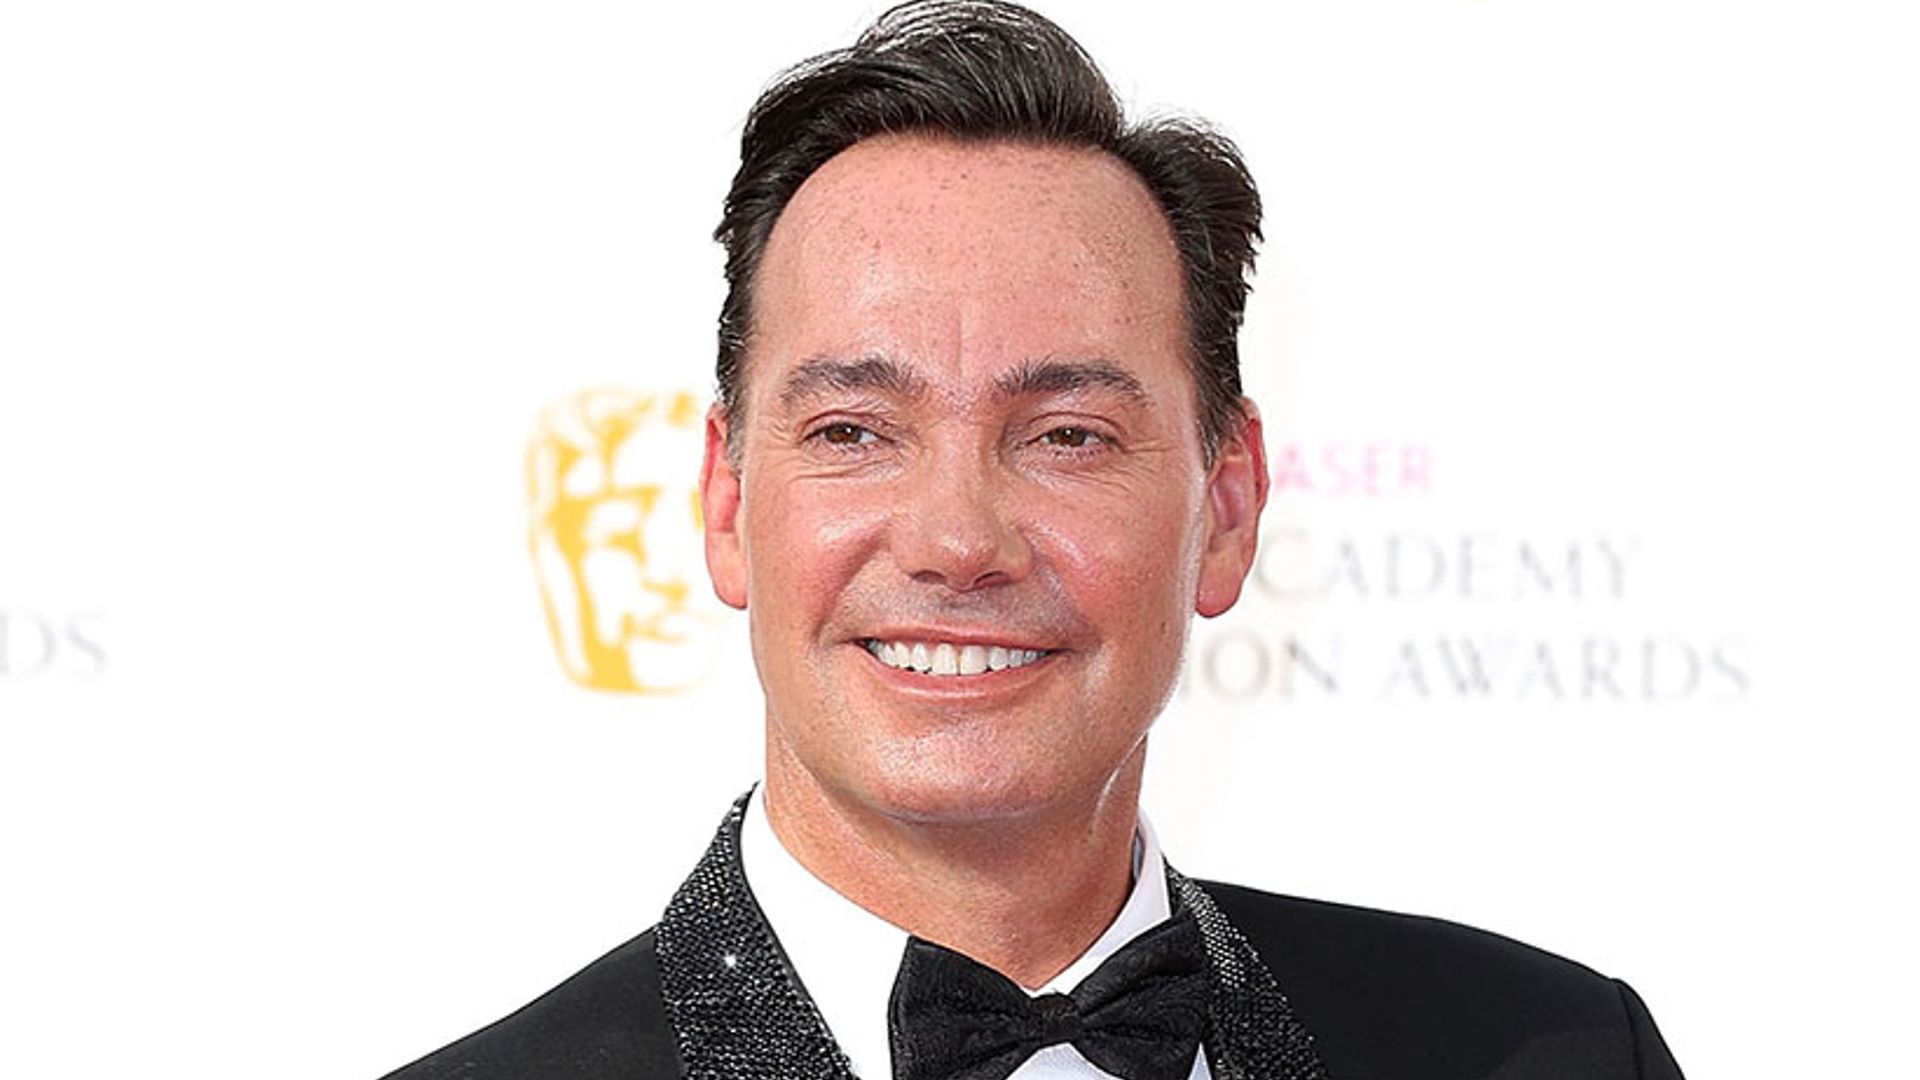 Strictly's Craig Revel Horwood talks about losing head judge position to Shirley Ballas